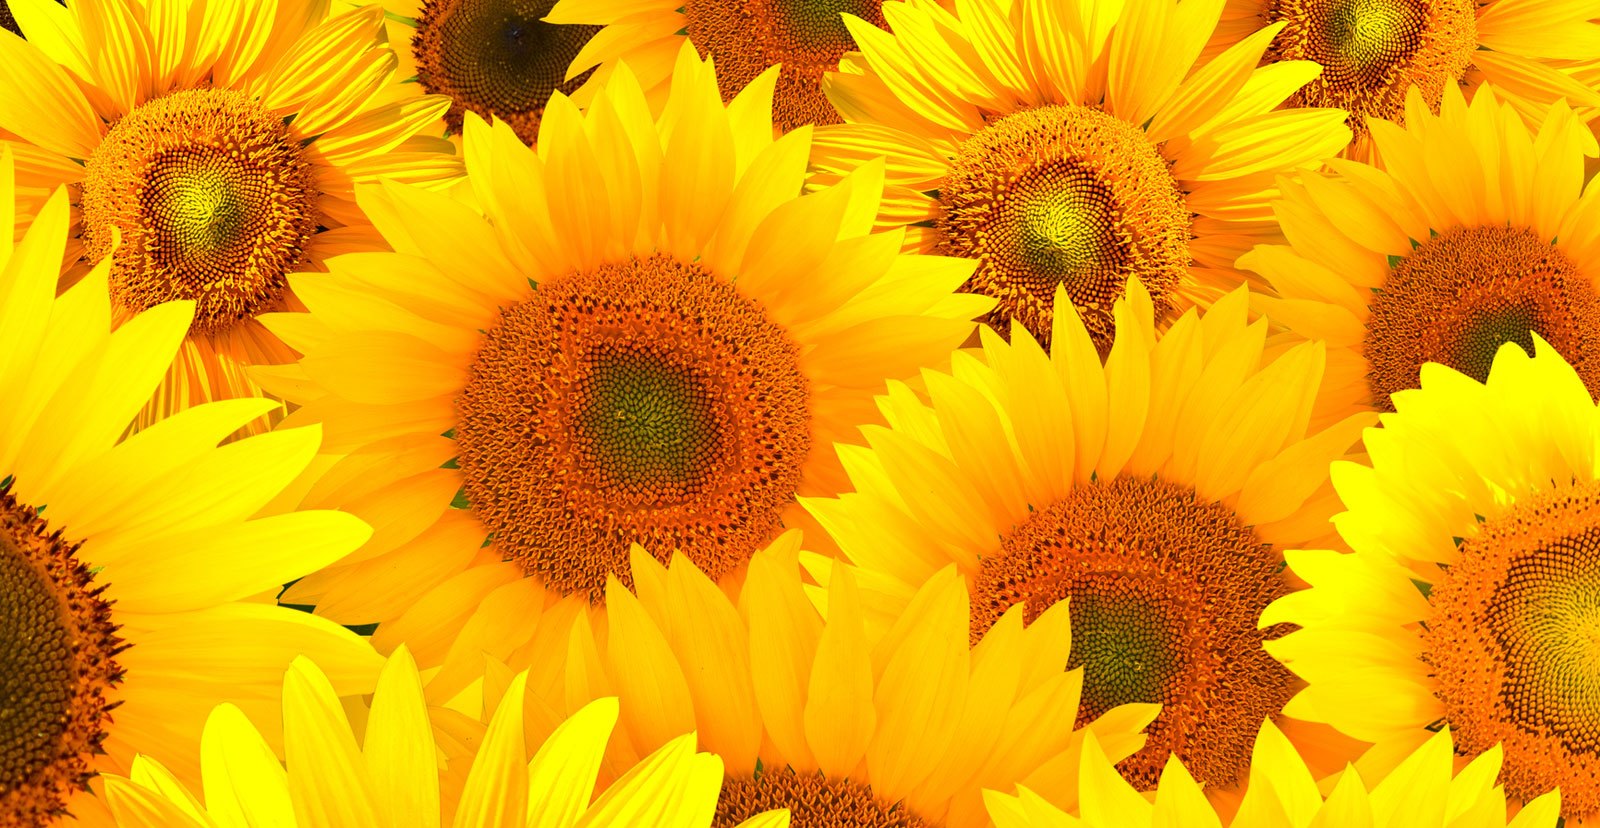 Collection of Sunflower Wallpaper download